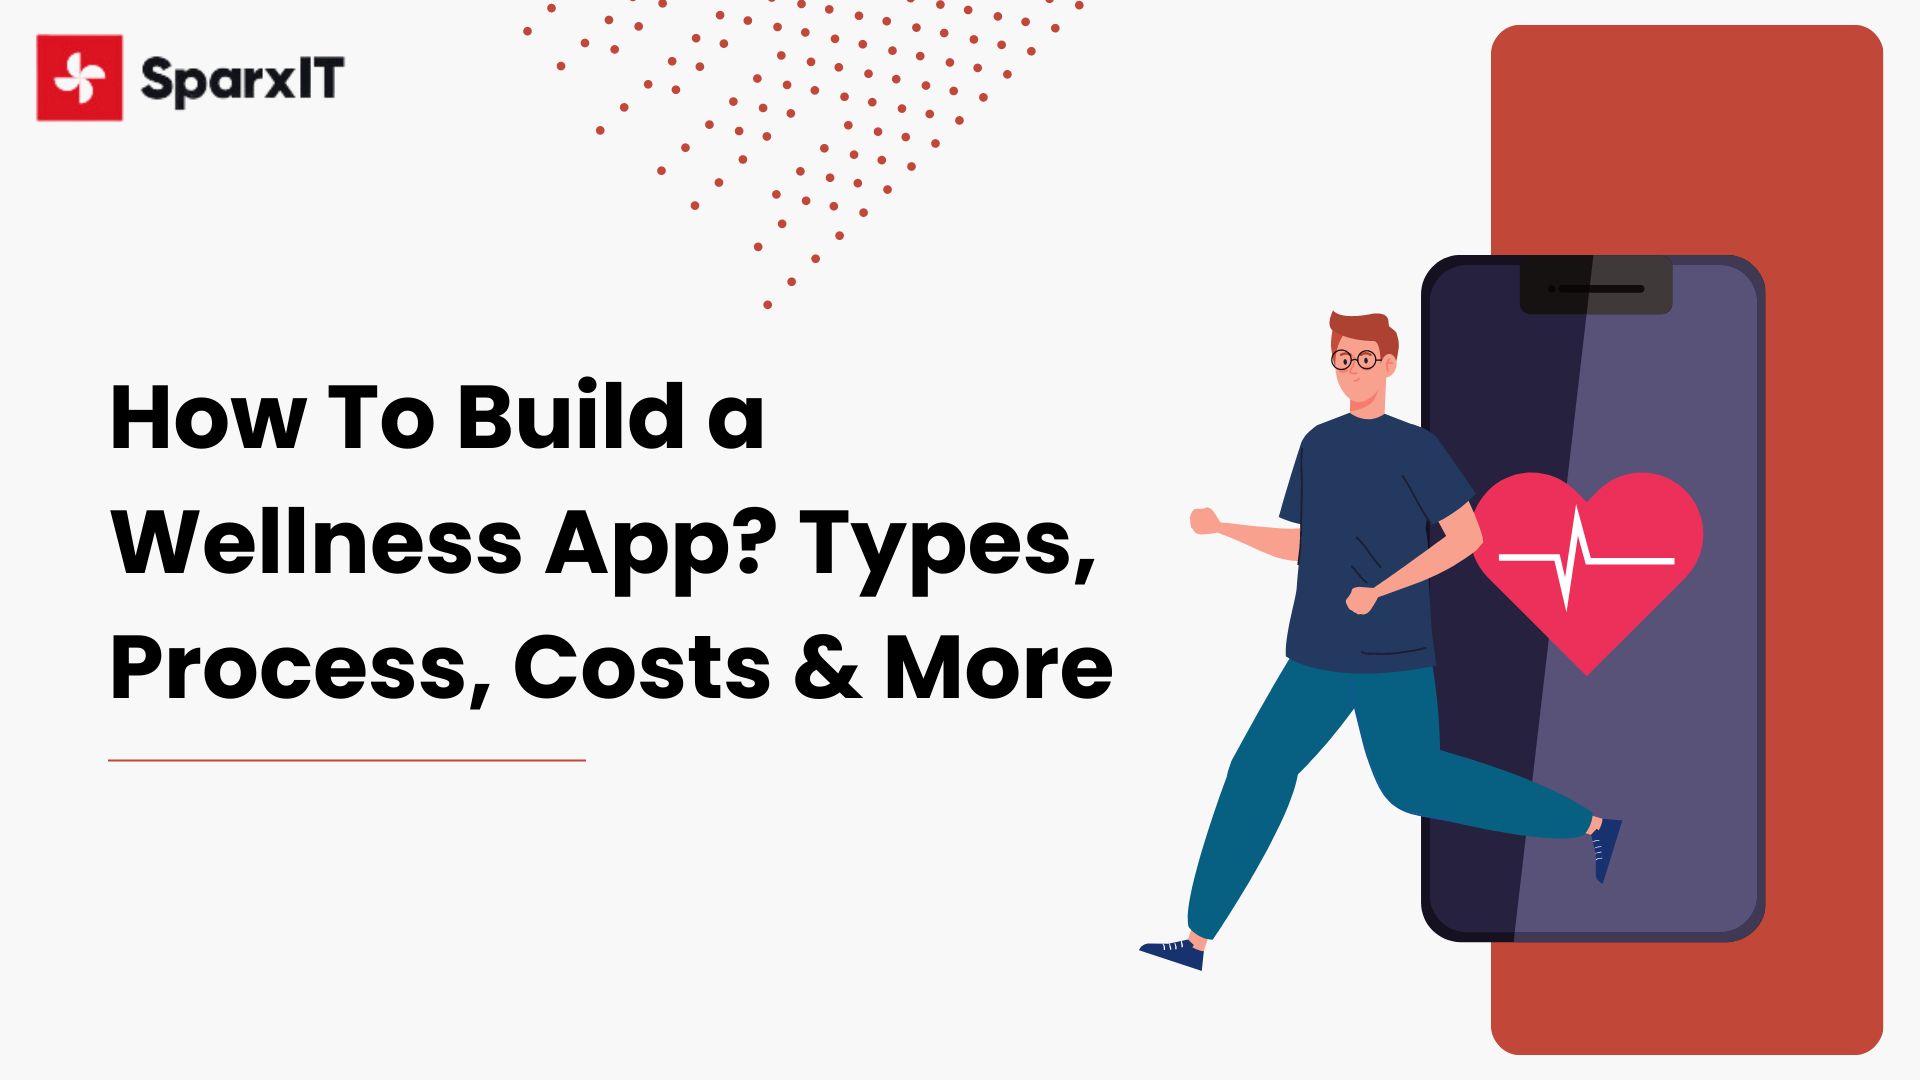 How To Build a Wellness App? Types, Process, Costs & More